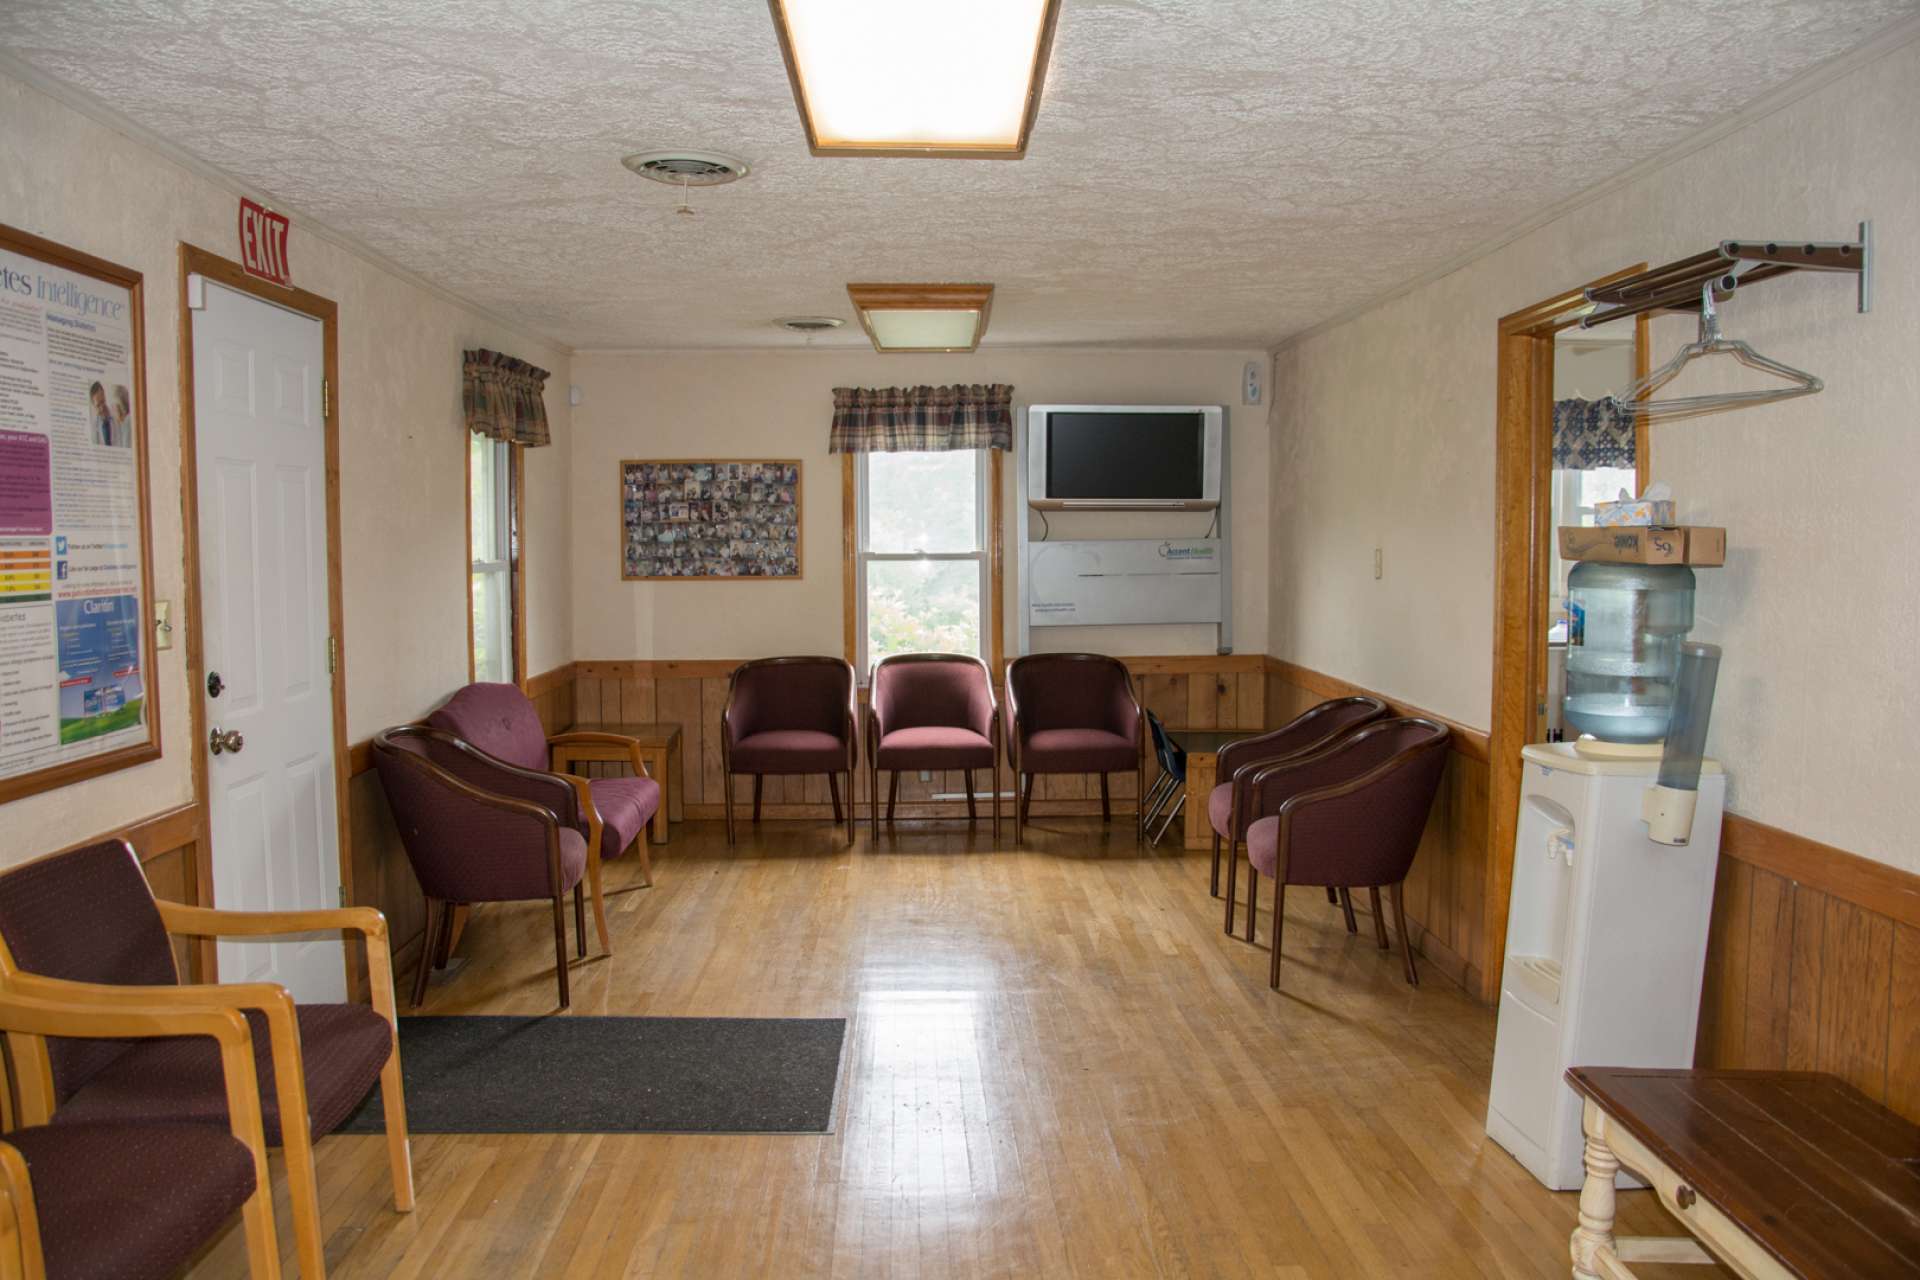 This facility is the former location of a successful medical practice offering a large reception area with half bath, six exam rooms, office with half bath, office with full bath, half bath in the hallway, large room with upper and lower cabinets and sink, two offices with check-out windows, and file room.